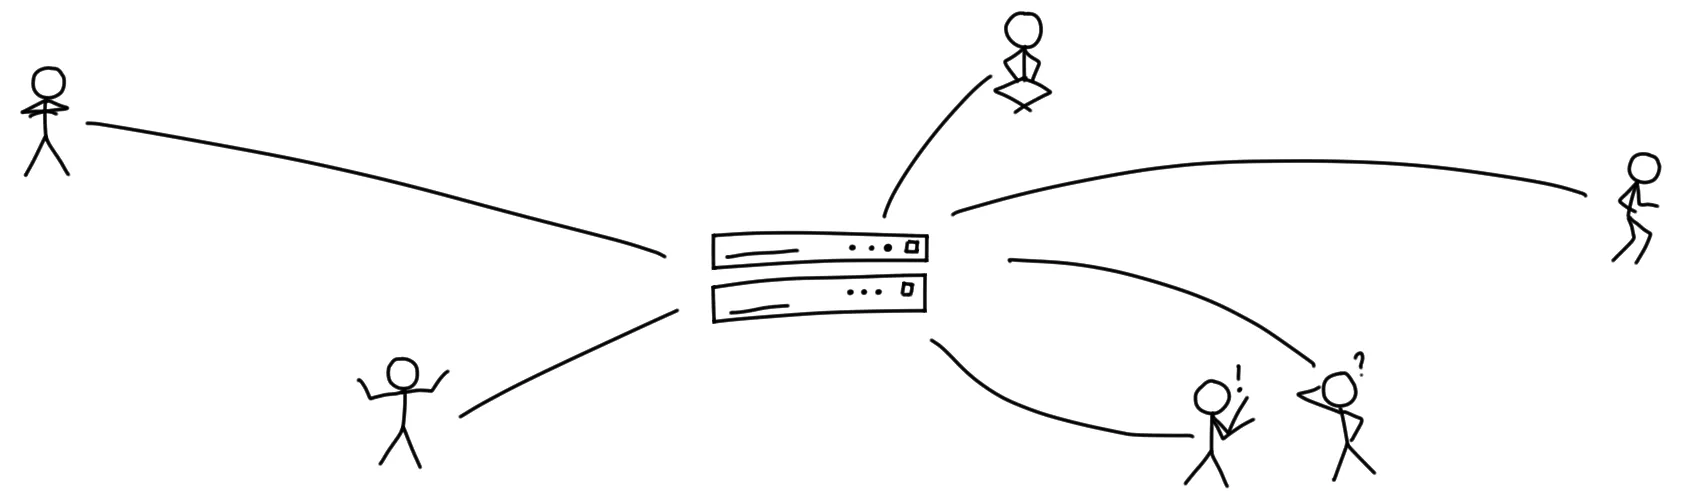 A representation of how centralized system works. There is one server in the middle, and individual people all connected to that central server.